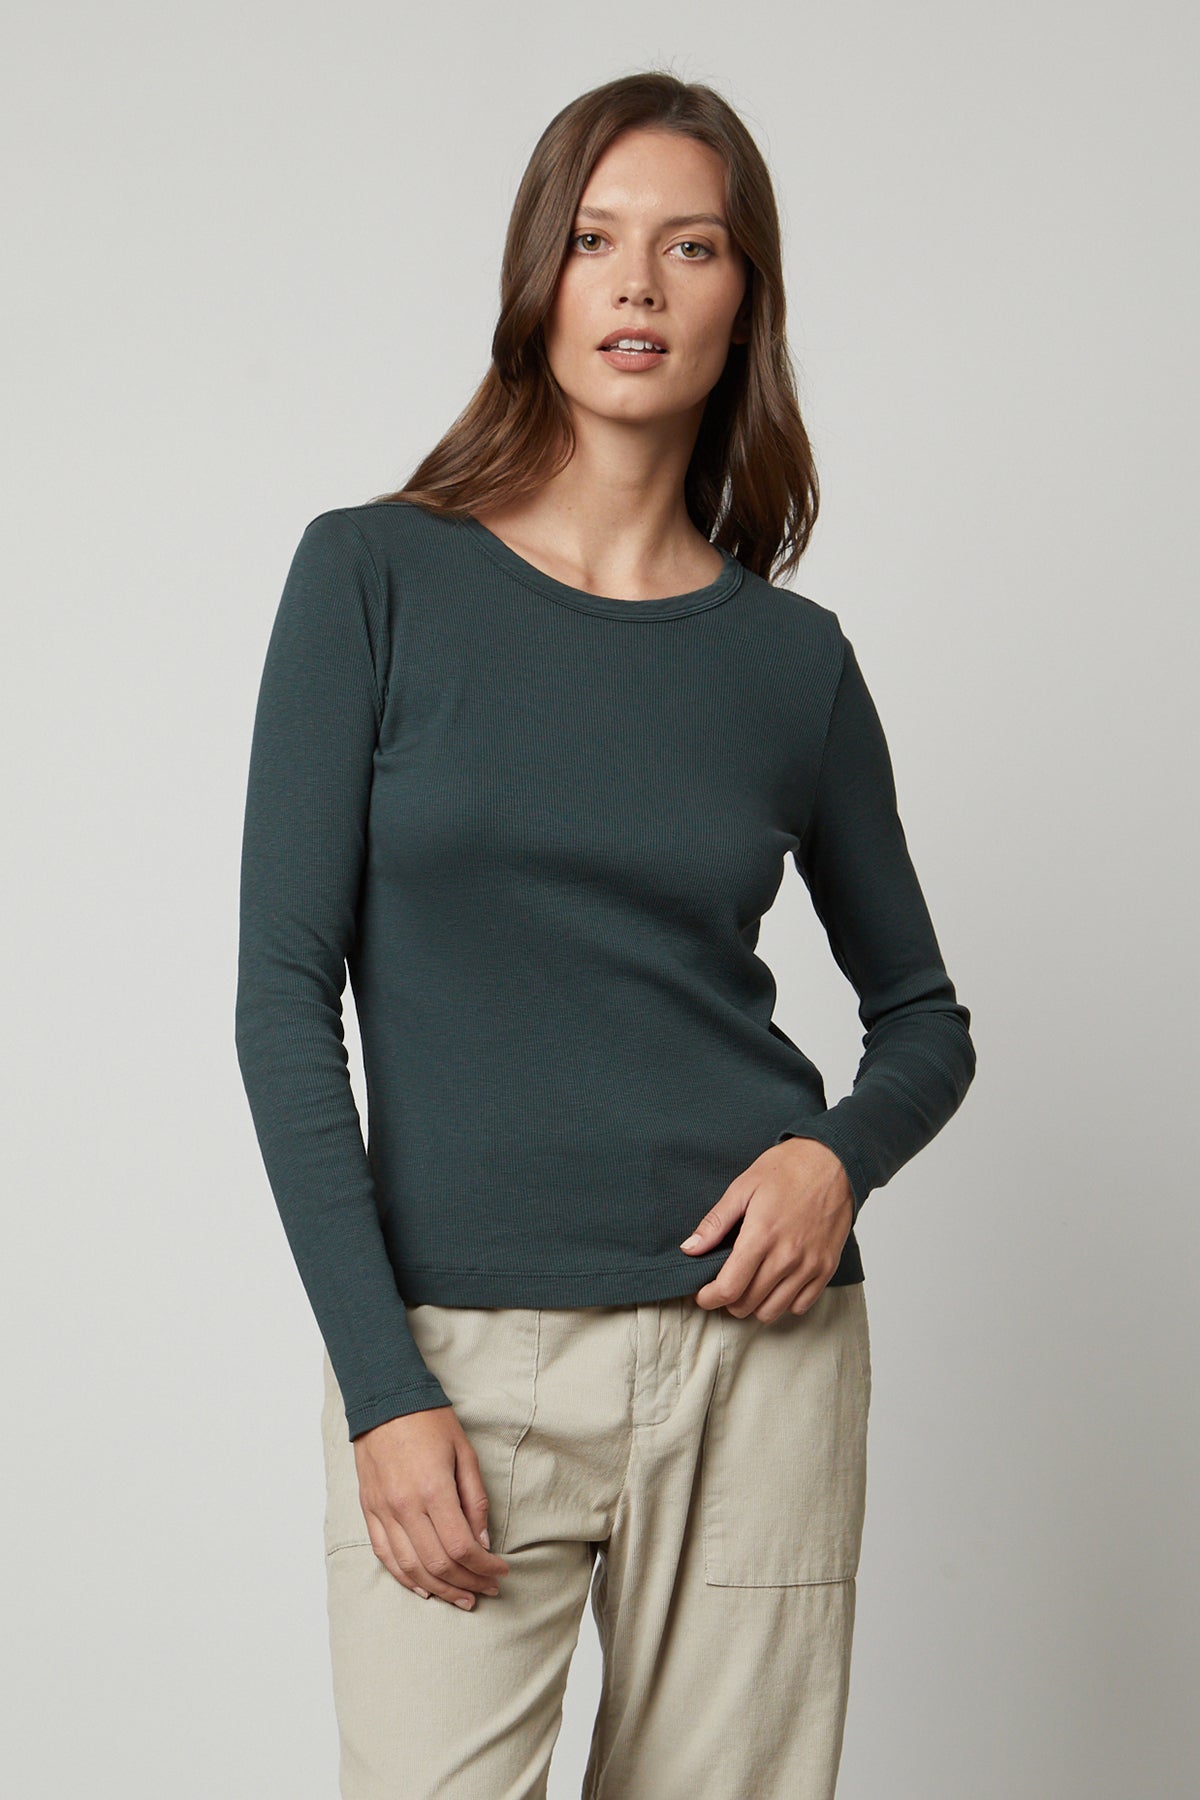 A woman wearing the Velvet by Graham & Spencer BAYLER RIBBED SCOOP NECK TEE and khaki pants.-35206768328897